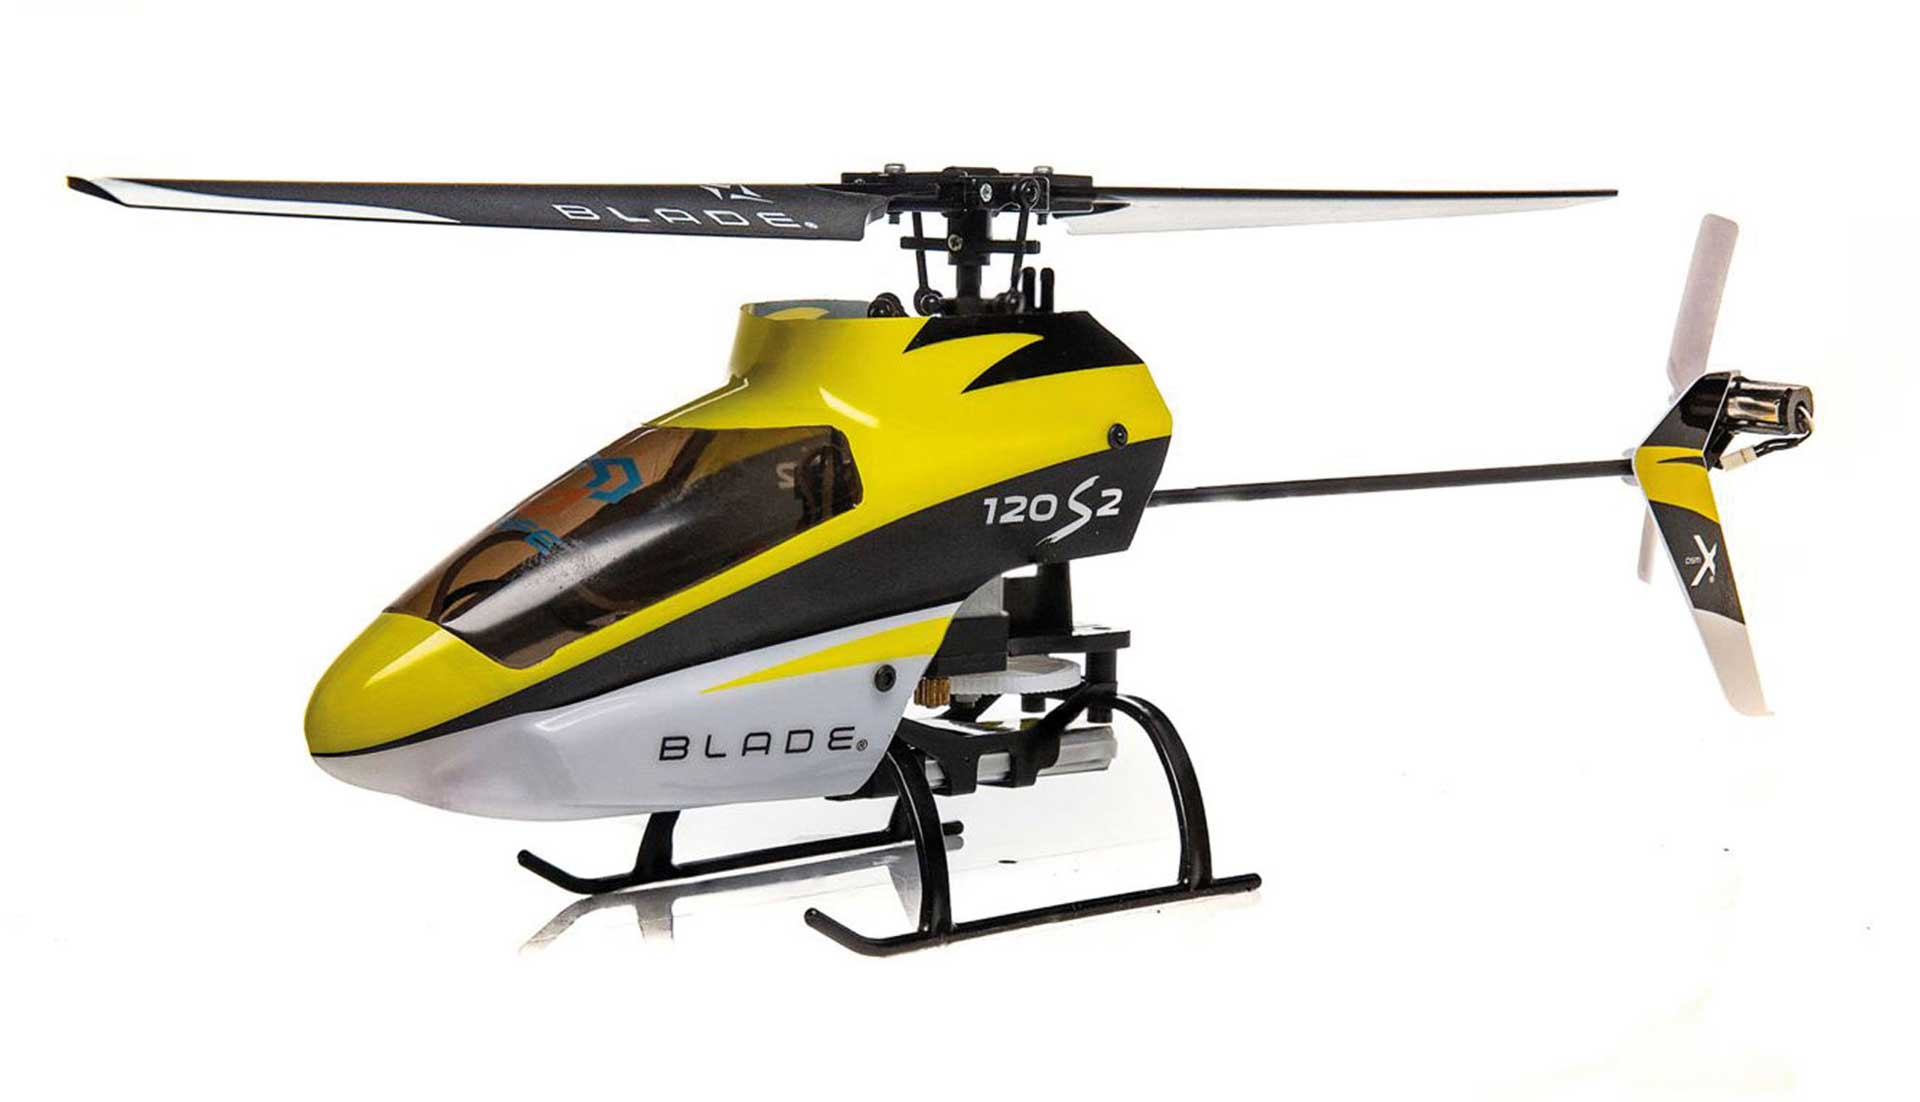 Blade 120 S2 RTF with SAFE RC Helicopter